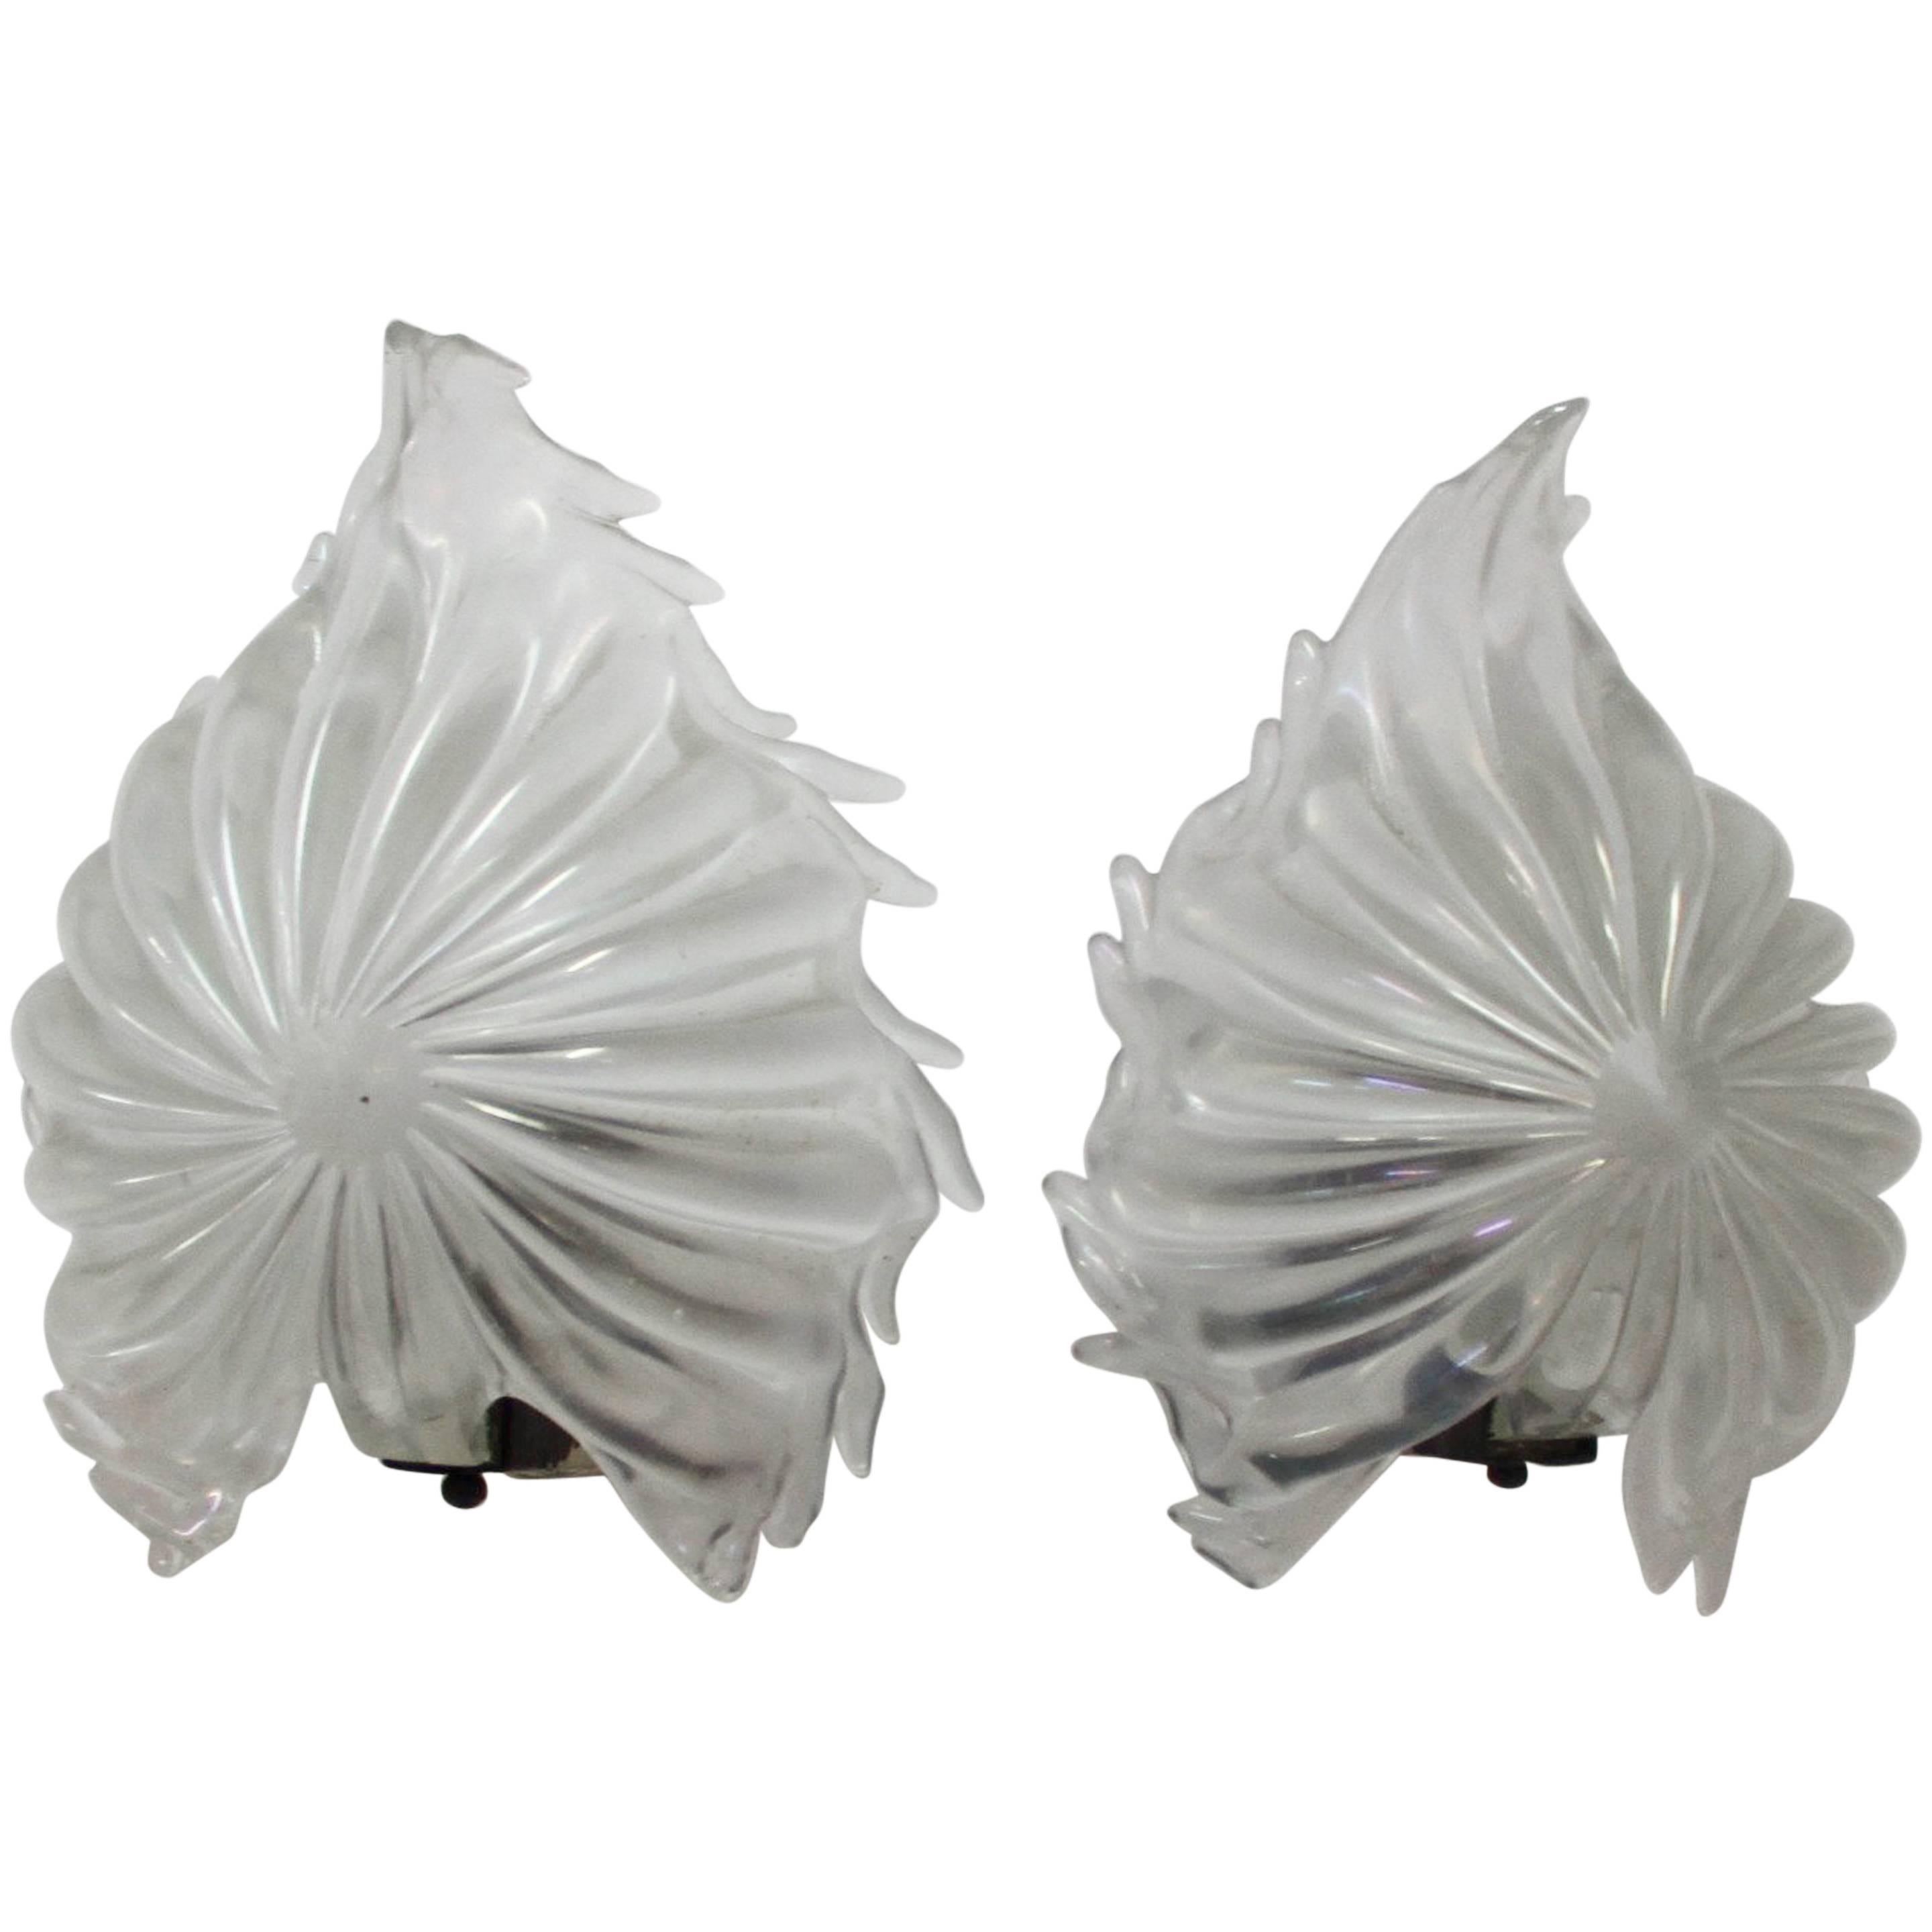 Ercole Barovier Pair of Appliques For Sale